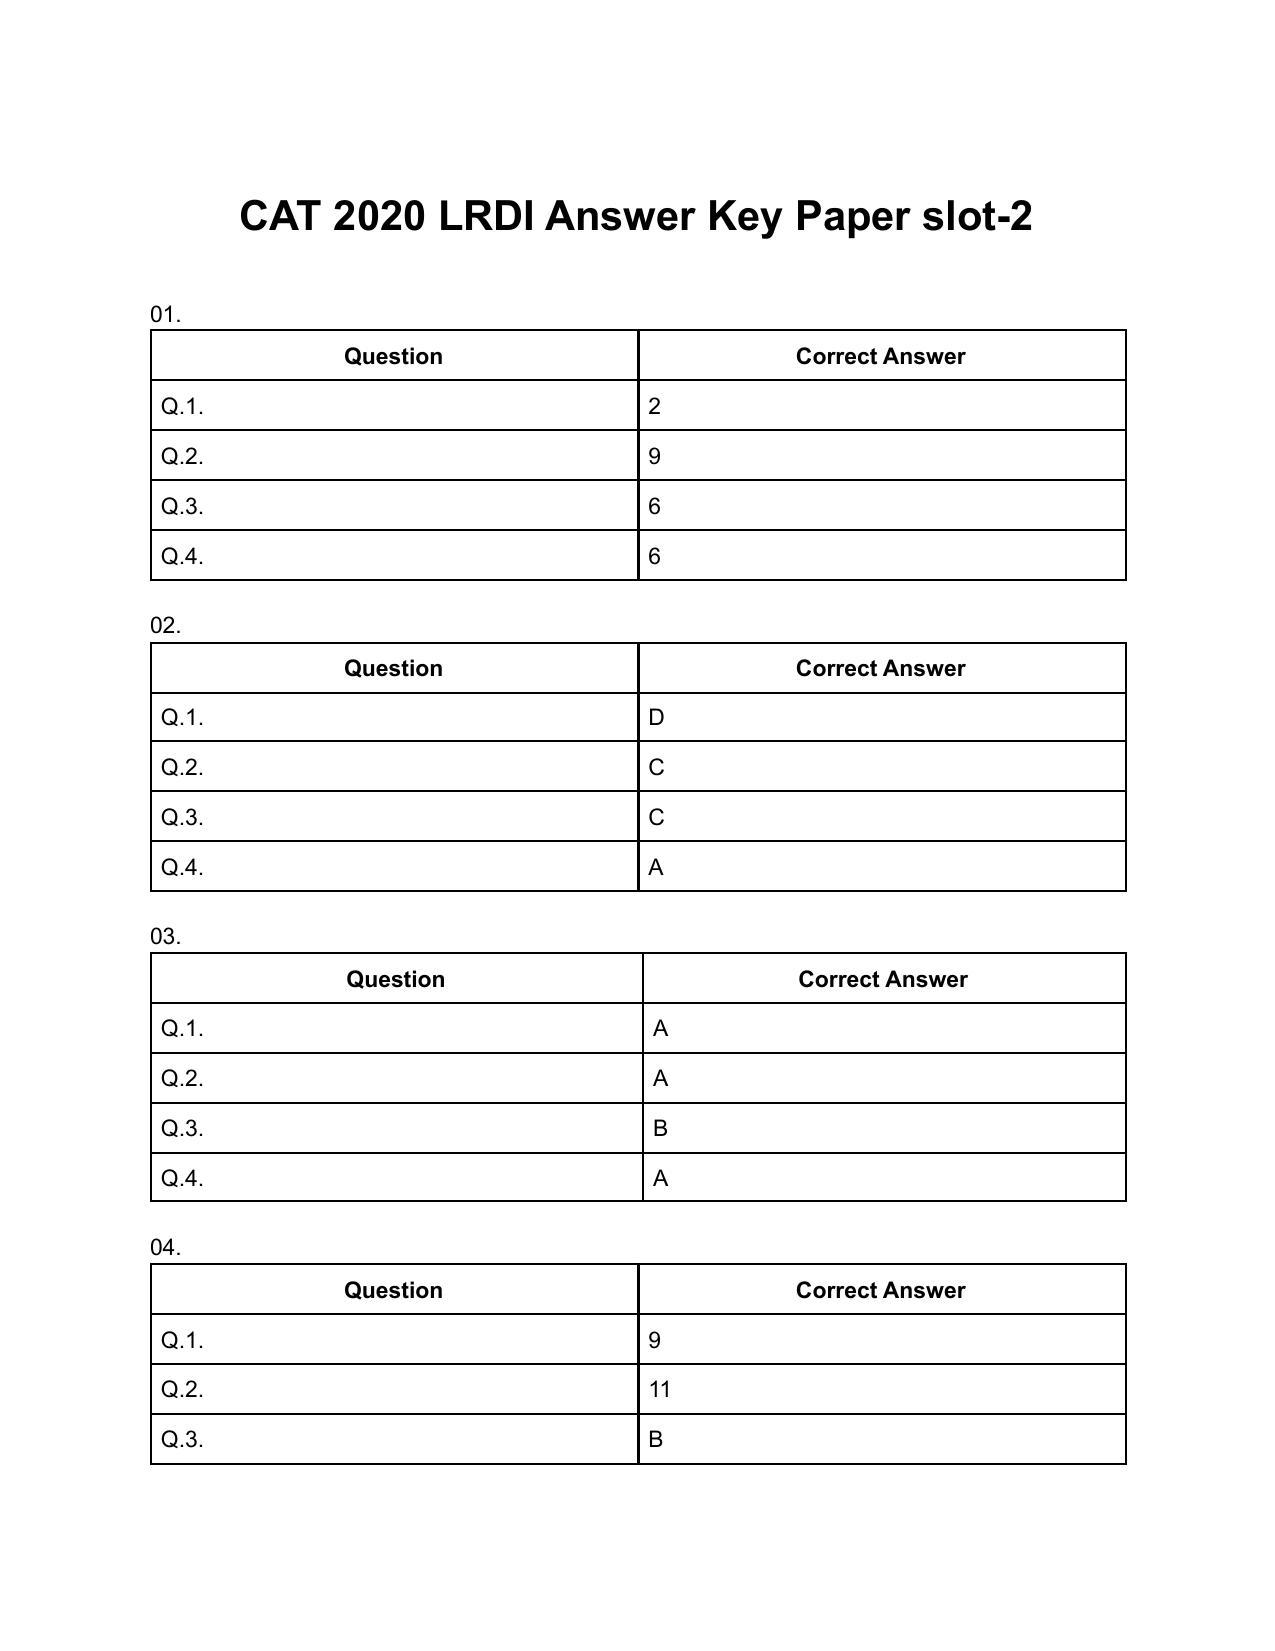 CAT 2020 CAT DILR Slot 2 Answer Key - Page 1